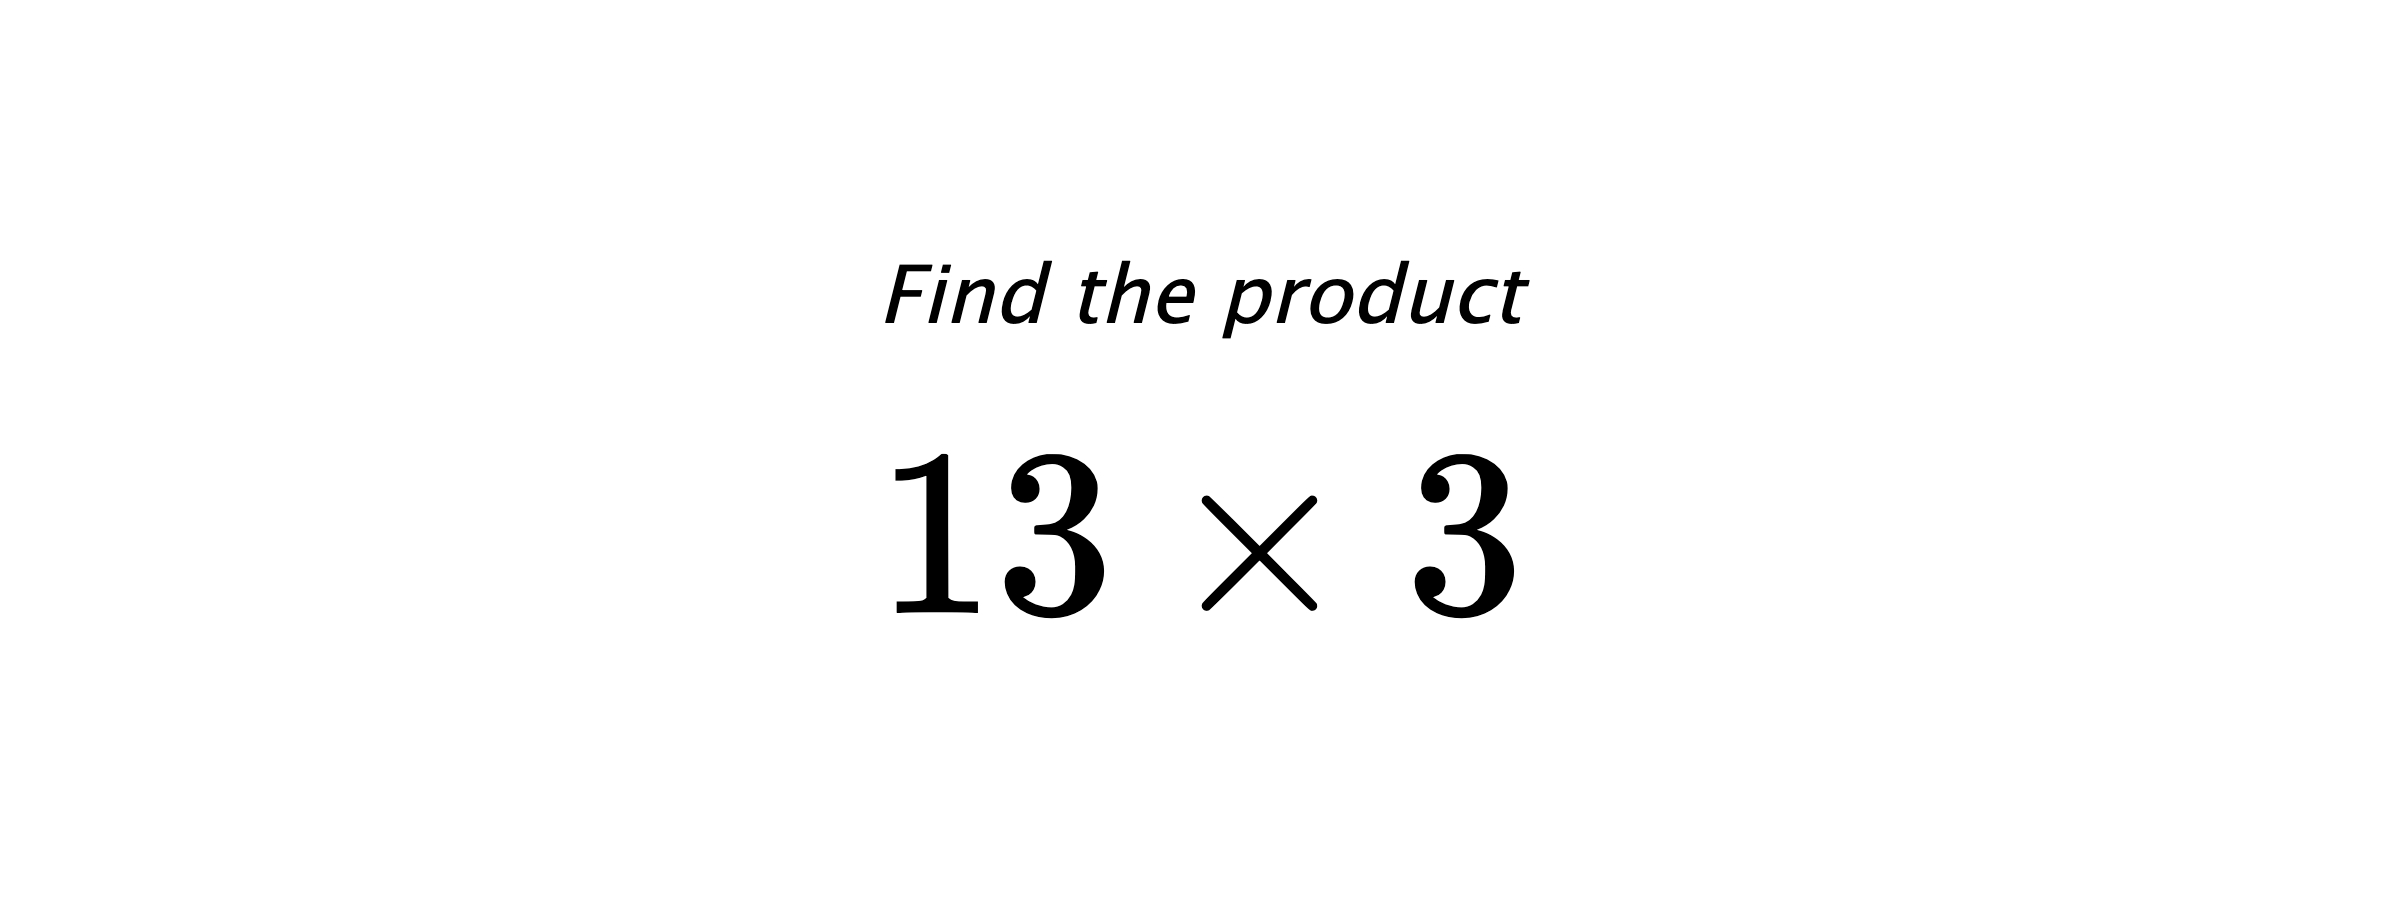 Find the product $ 13 \times 3 $